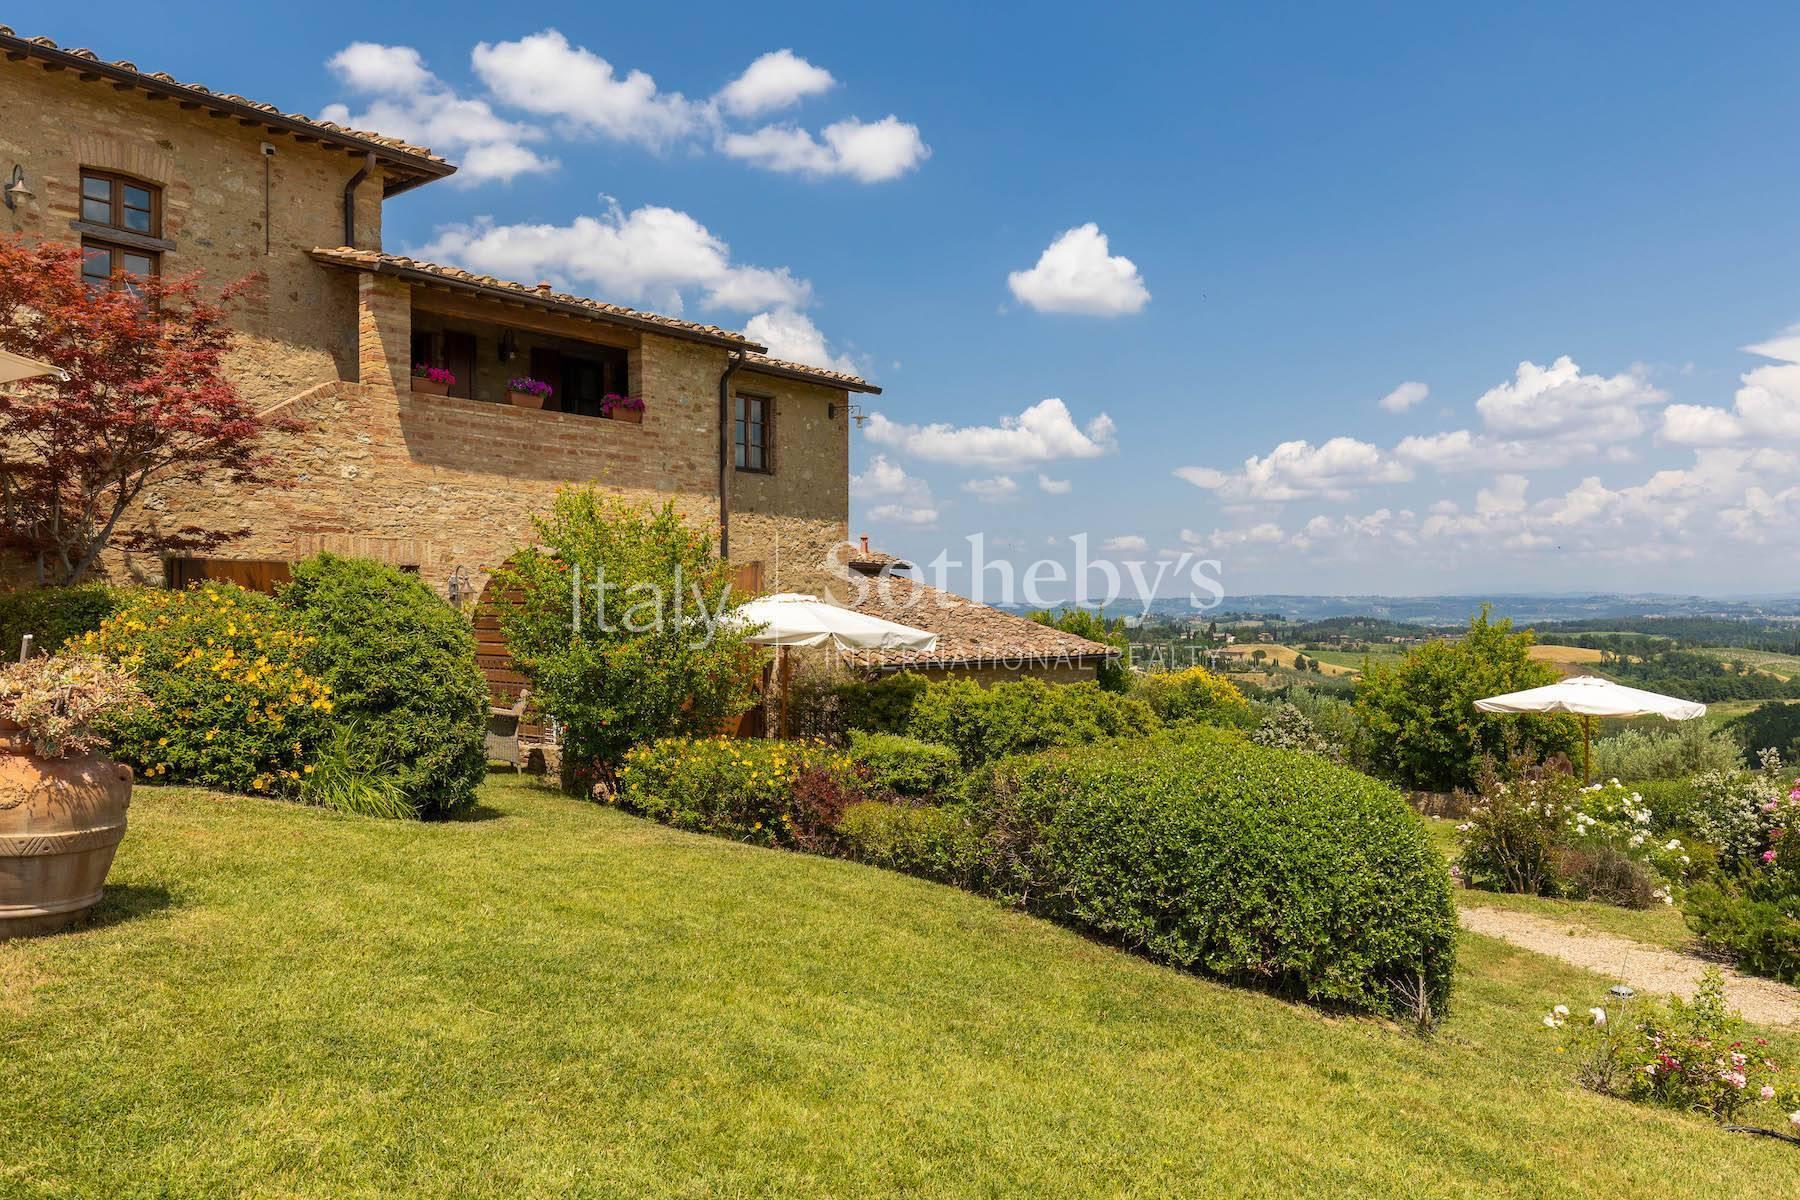 Winery with ancient country house in San gimignano - 5